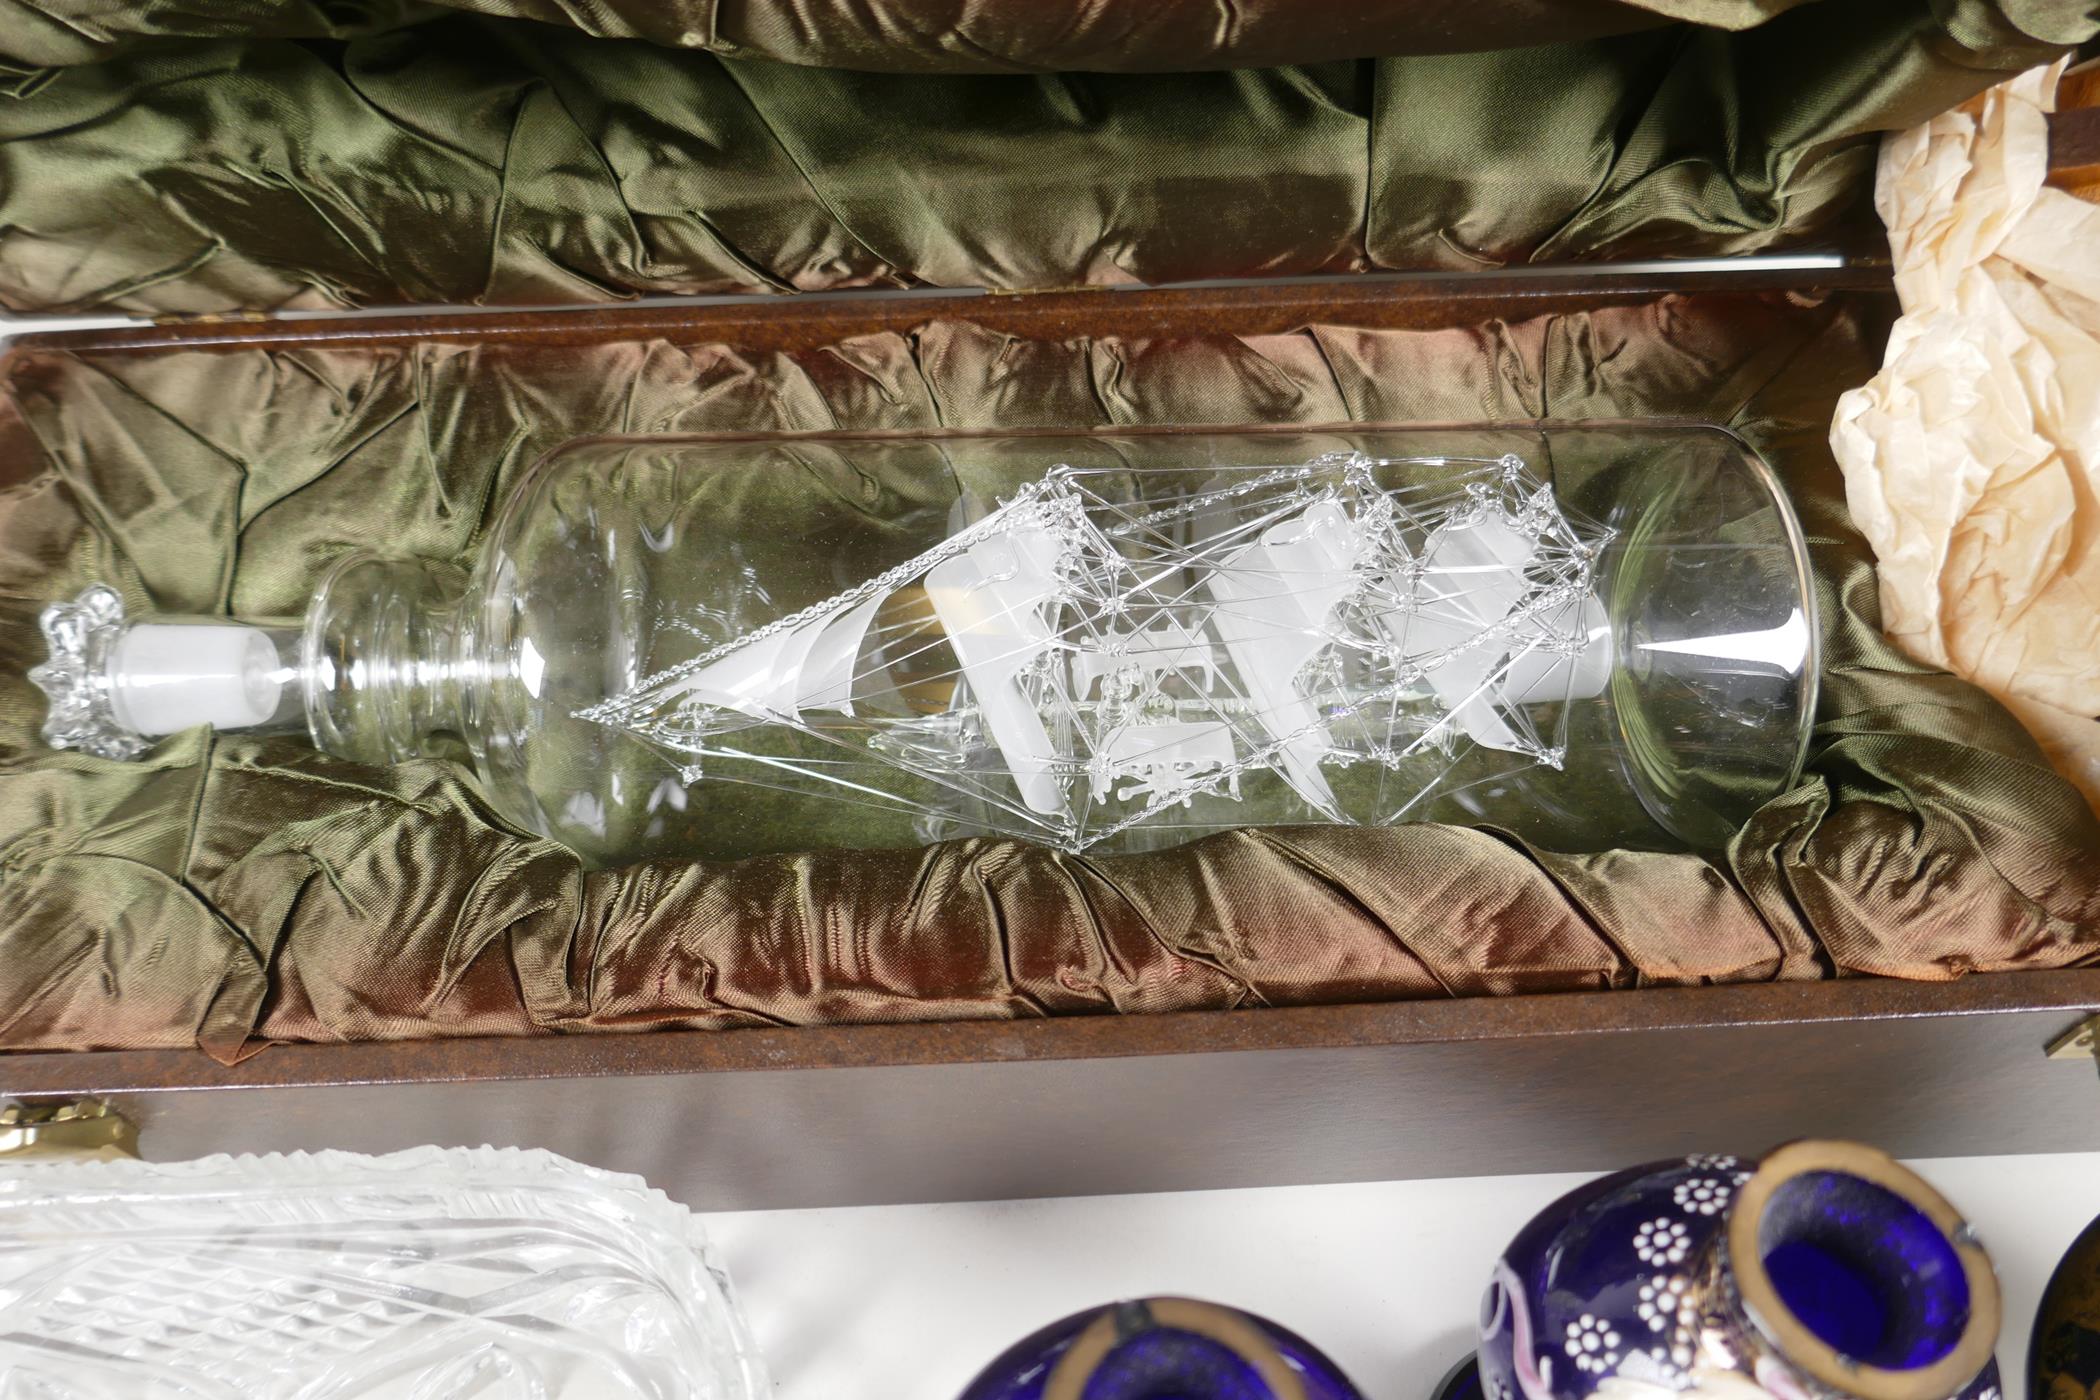 A Lichfield Glass Sculptures limited edition model of the P.S. Savanna in a bottle, 14" long, - Image 6 of 7